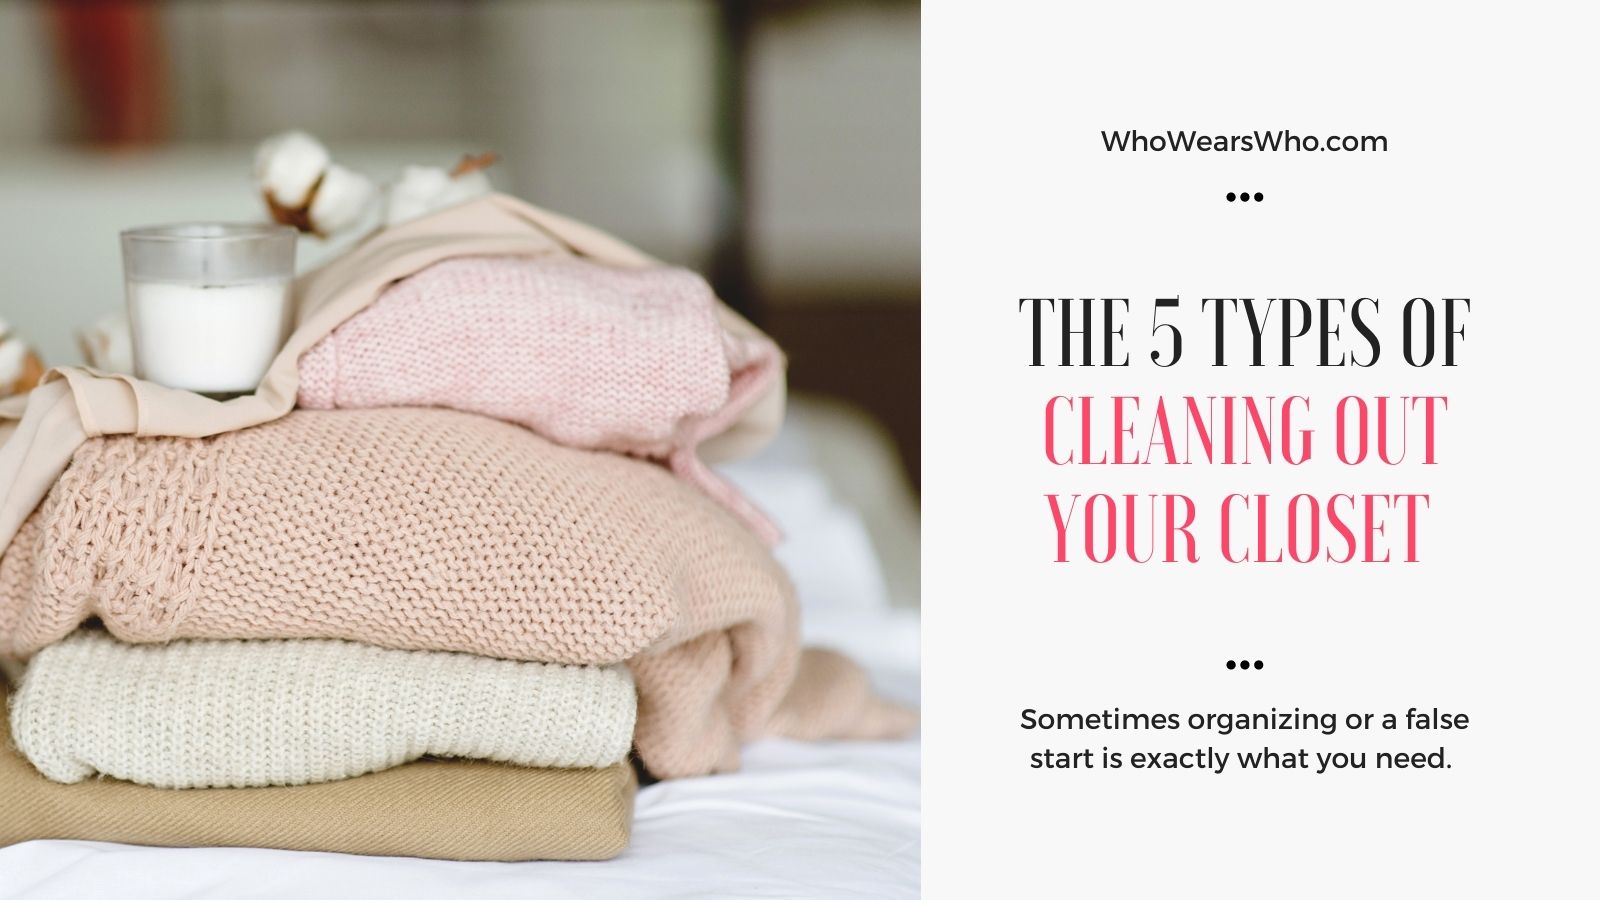 Closet Clean Out The 5 Types of Cleaning Out Your Closet Twitter